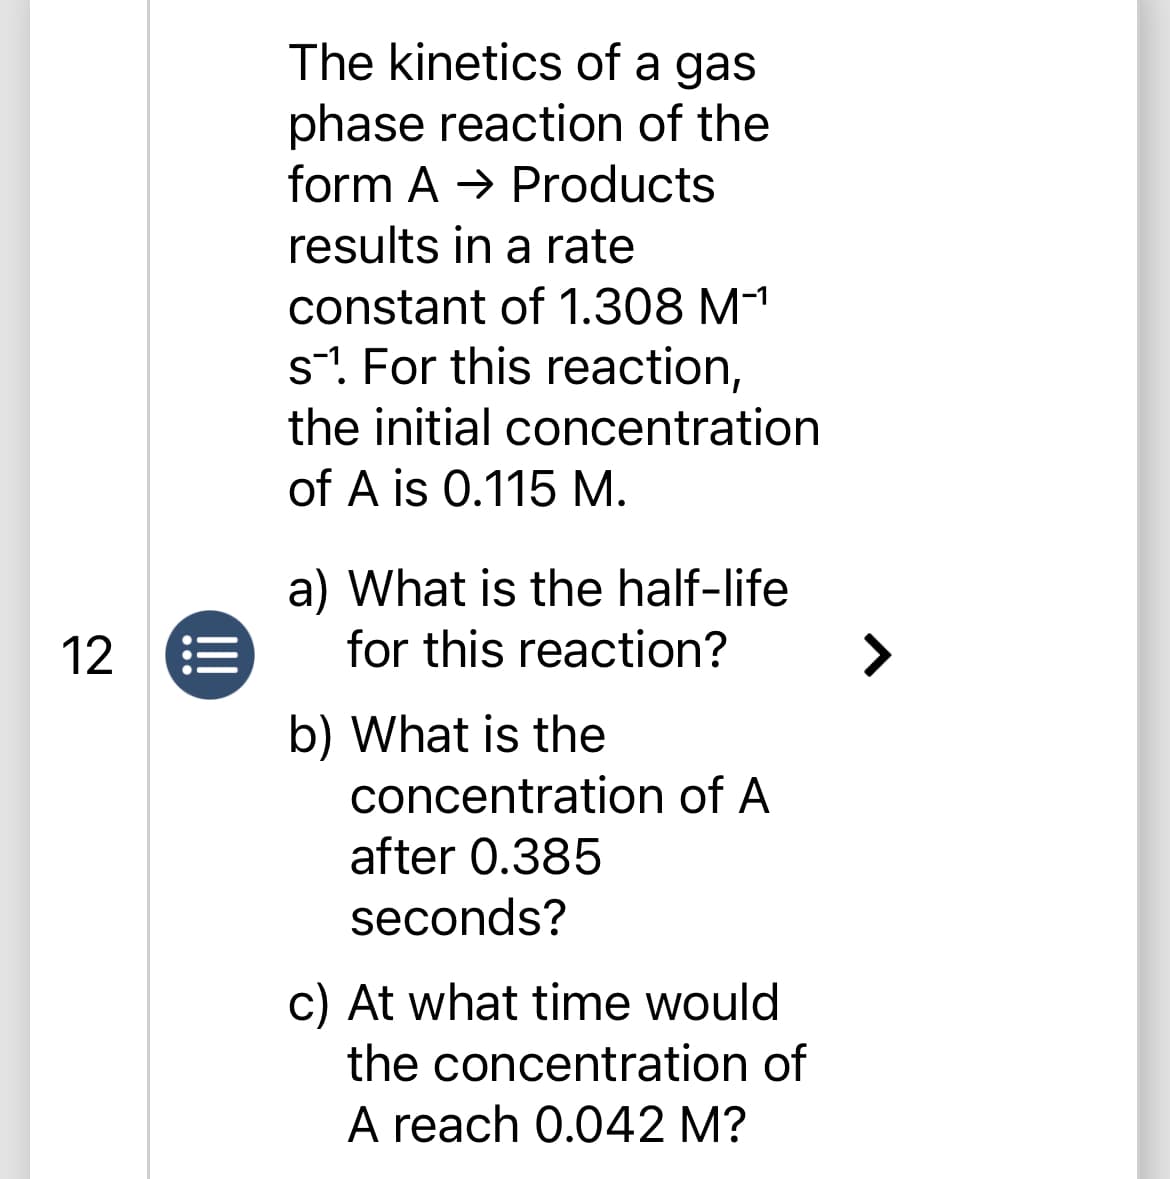 12
The kinetics of a gas
phase reaction of the
form A→ Products
results in a rate
constant of 1.308 M-¹
s1. For this reaction,
the initial concentration
of A is 0.115 M.
a) What is the half-life
for this reaction?
b) What is the
concentration of A
after 0.385
seconds?
c) At what time would
the concentration of
A reach 0.042 M?